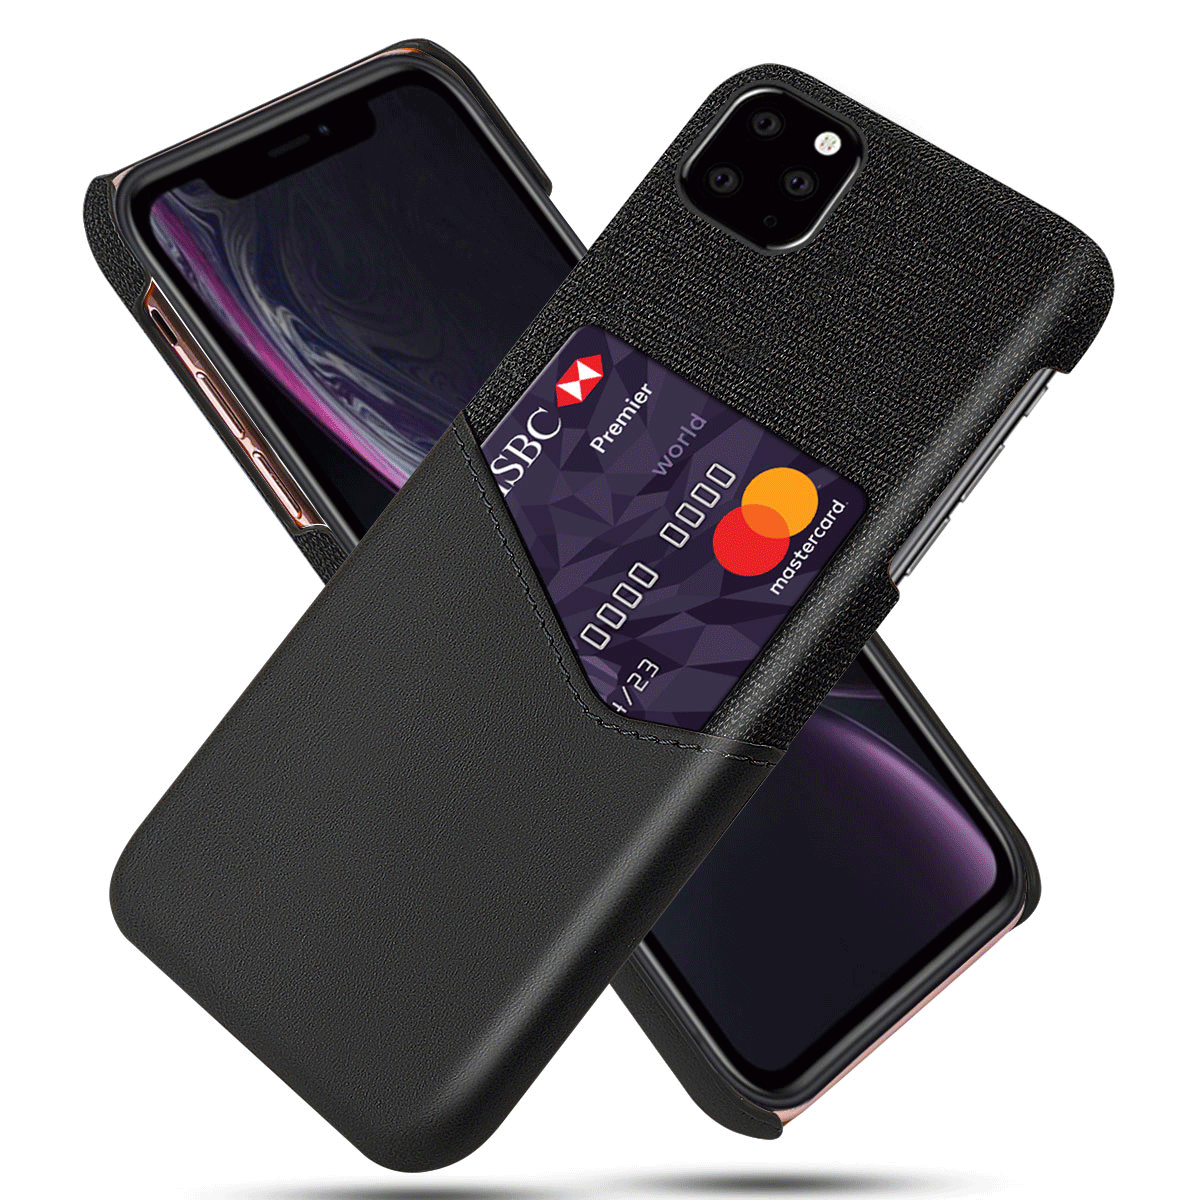 

Bakeey Luxury PU Leather Cloth with Card Slot Shockproof Anti-scratch Protective Case for iPhone 11 Pro 5.8 inch